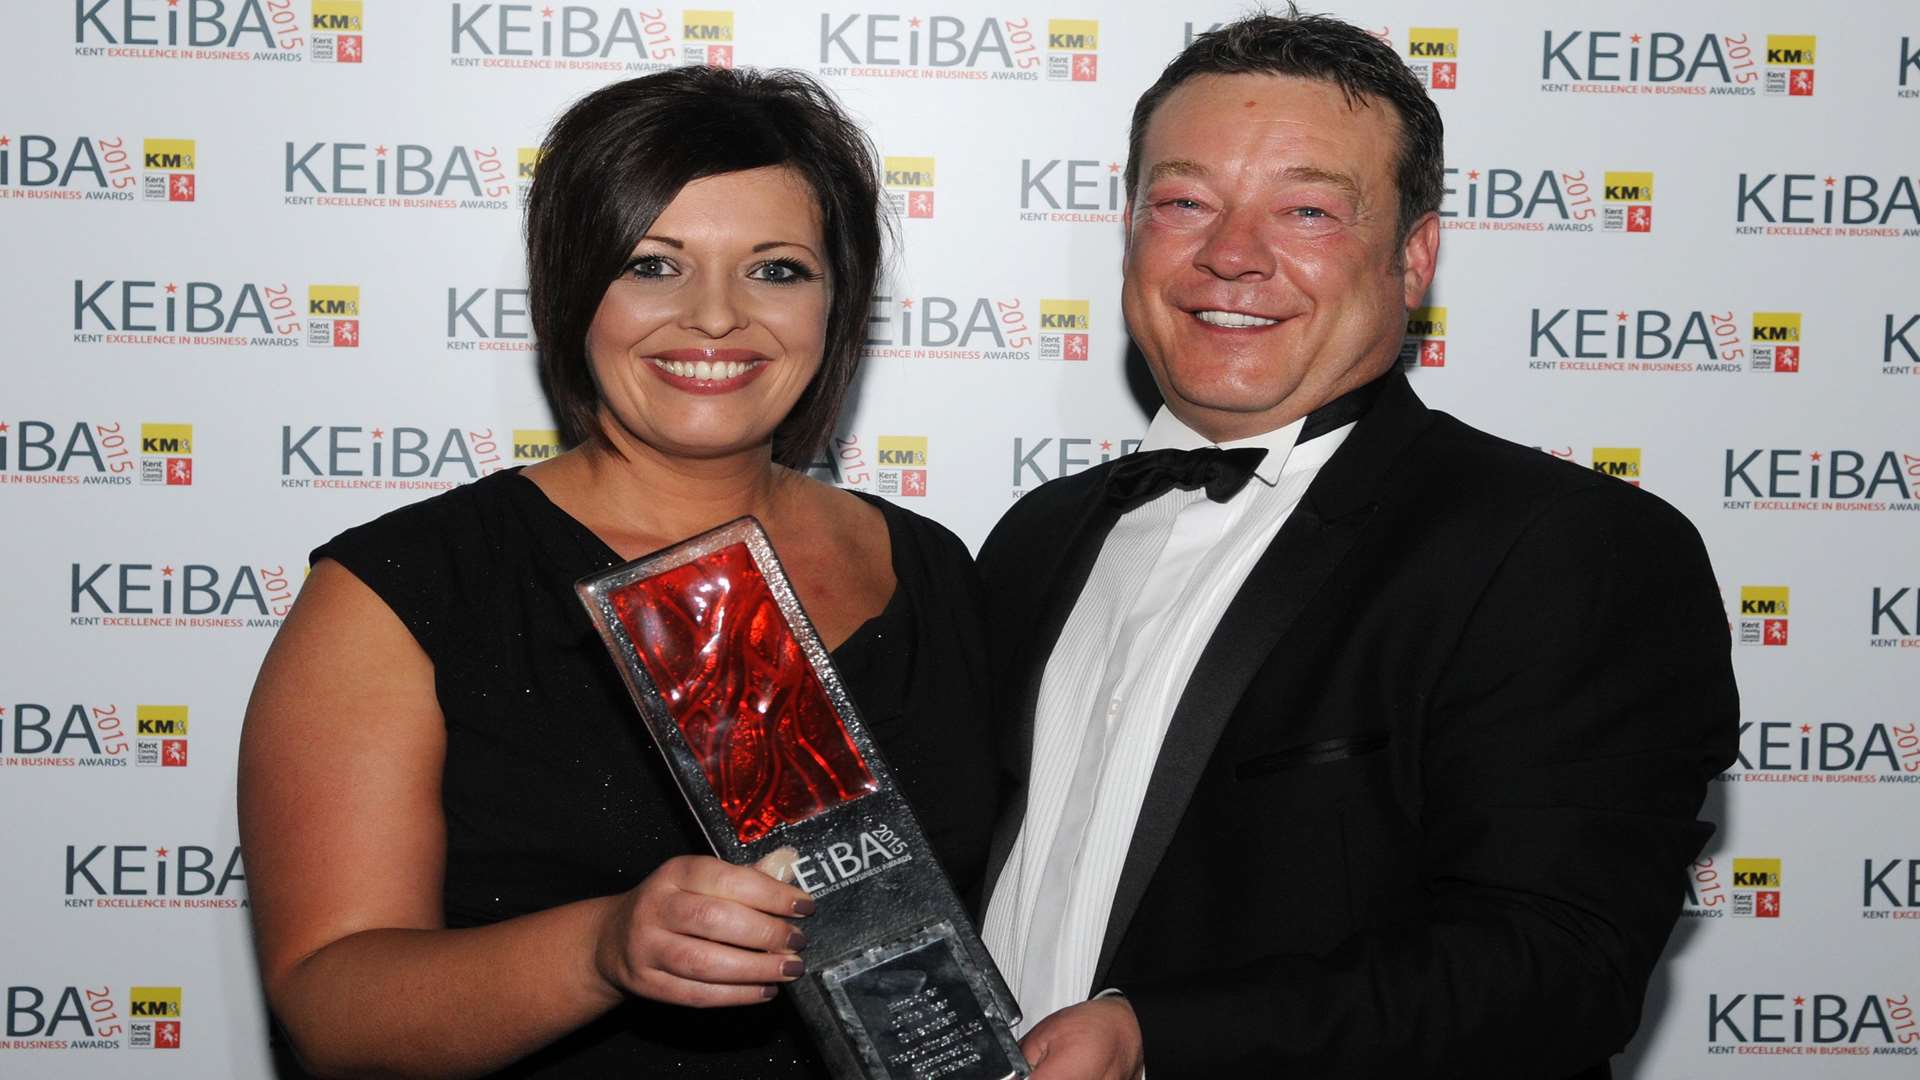 Swanstaff Recruitment became the first company to win a hatrick of KEiBAs